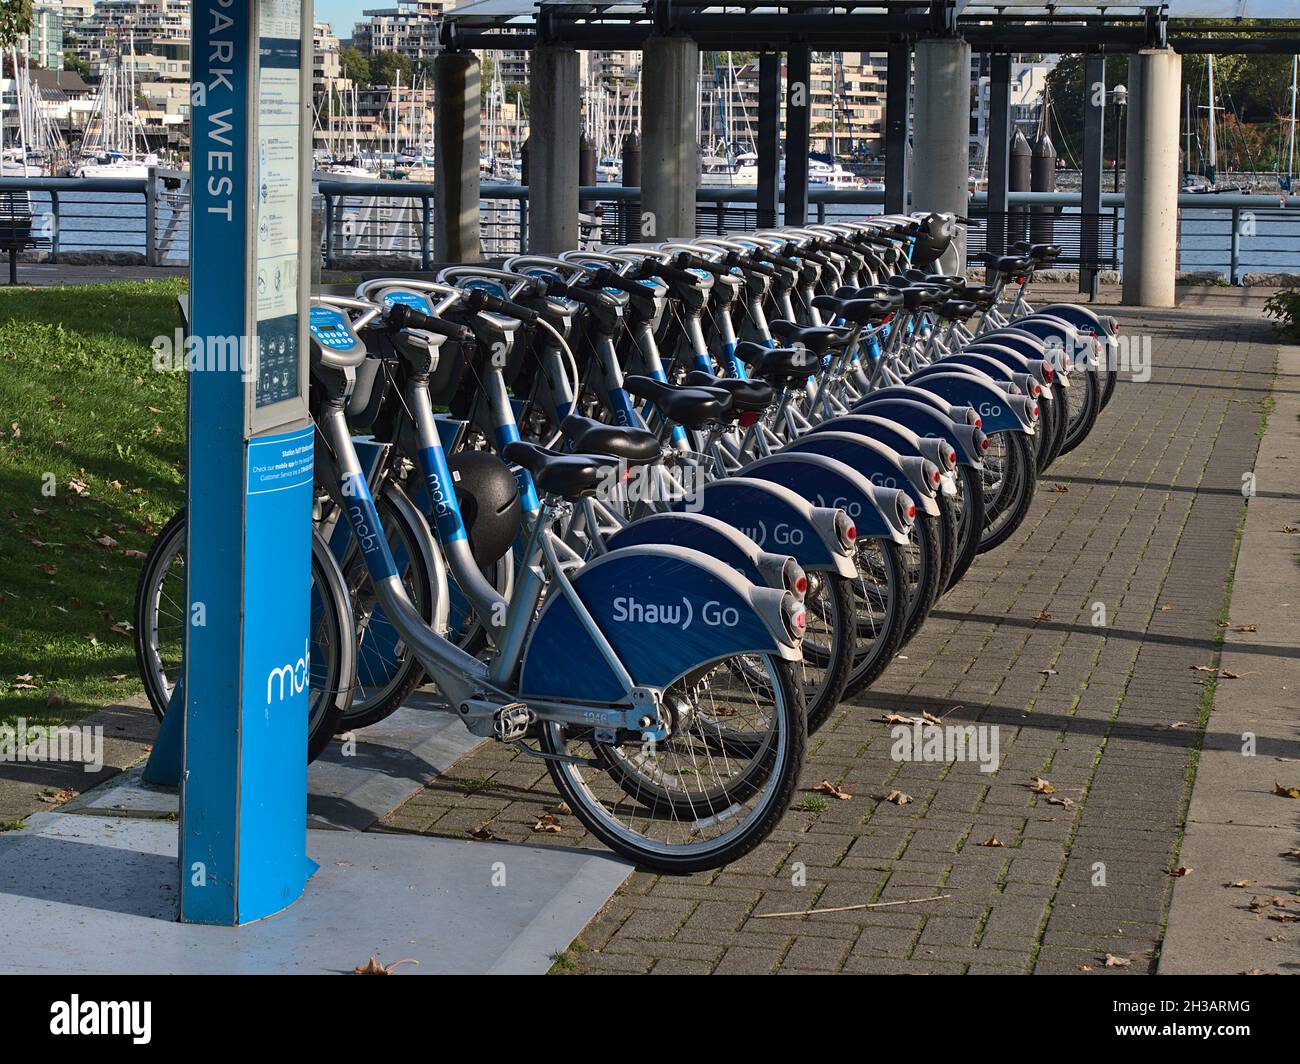 View bicycles in a row at Mobi bike share station in West David Lam Park, False Creek, operated by Vancouver Bike Share Inc. with Shaw Go advert. Stock Photo